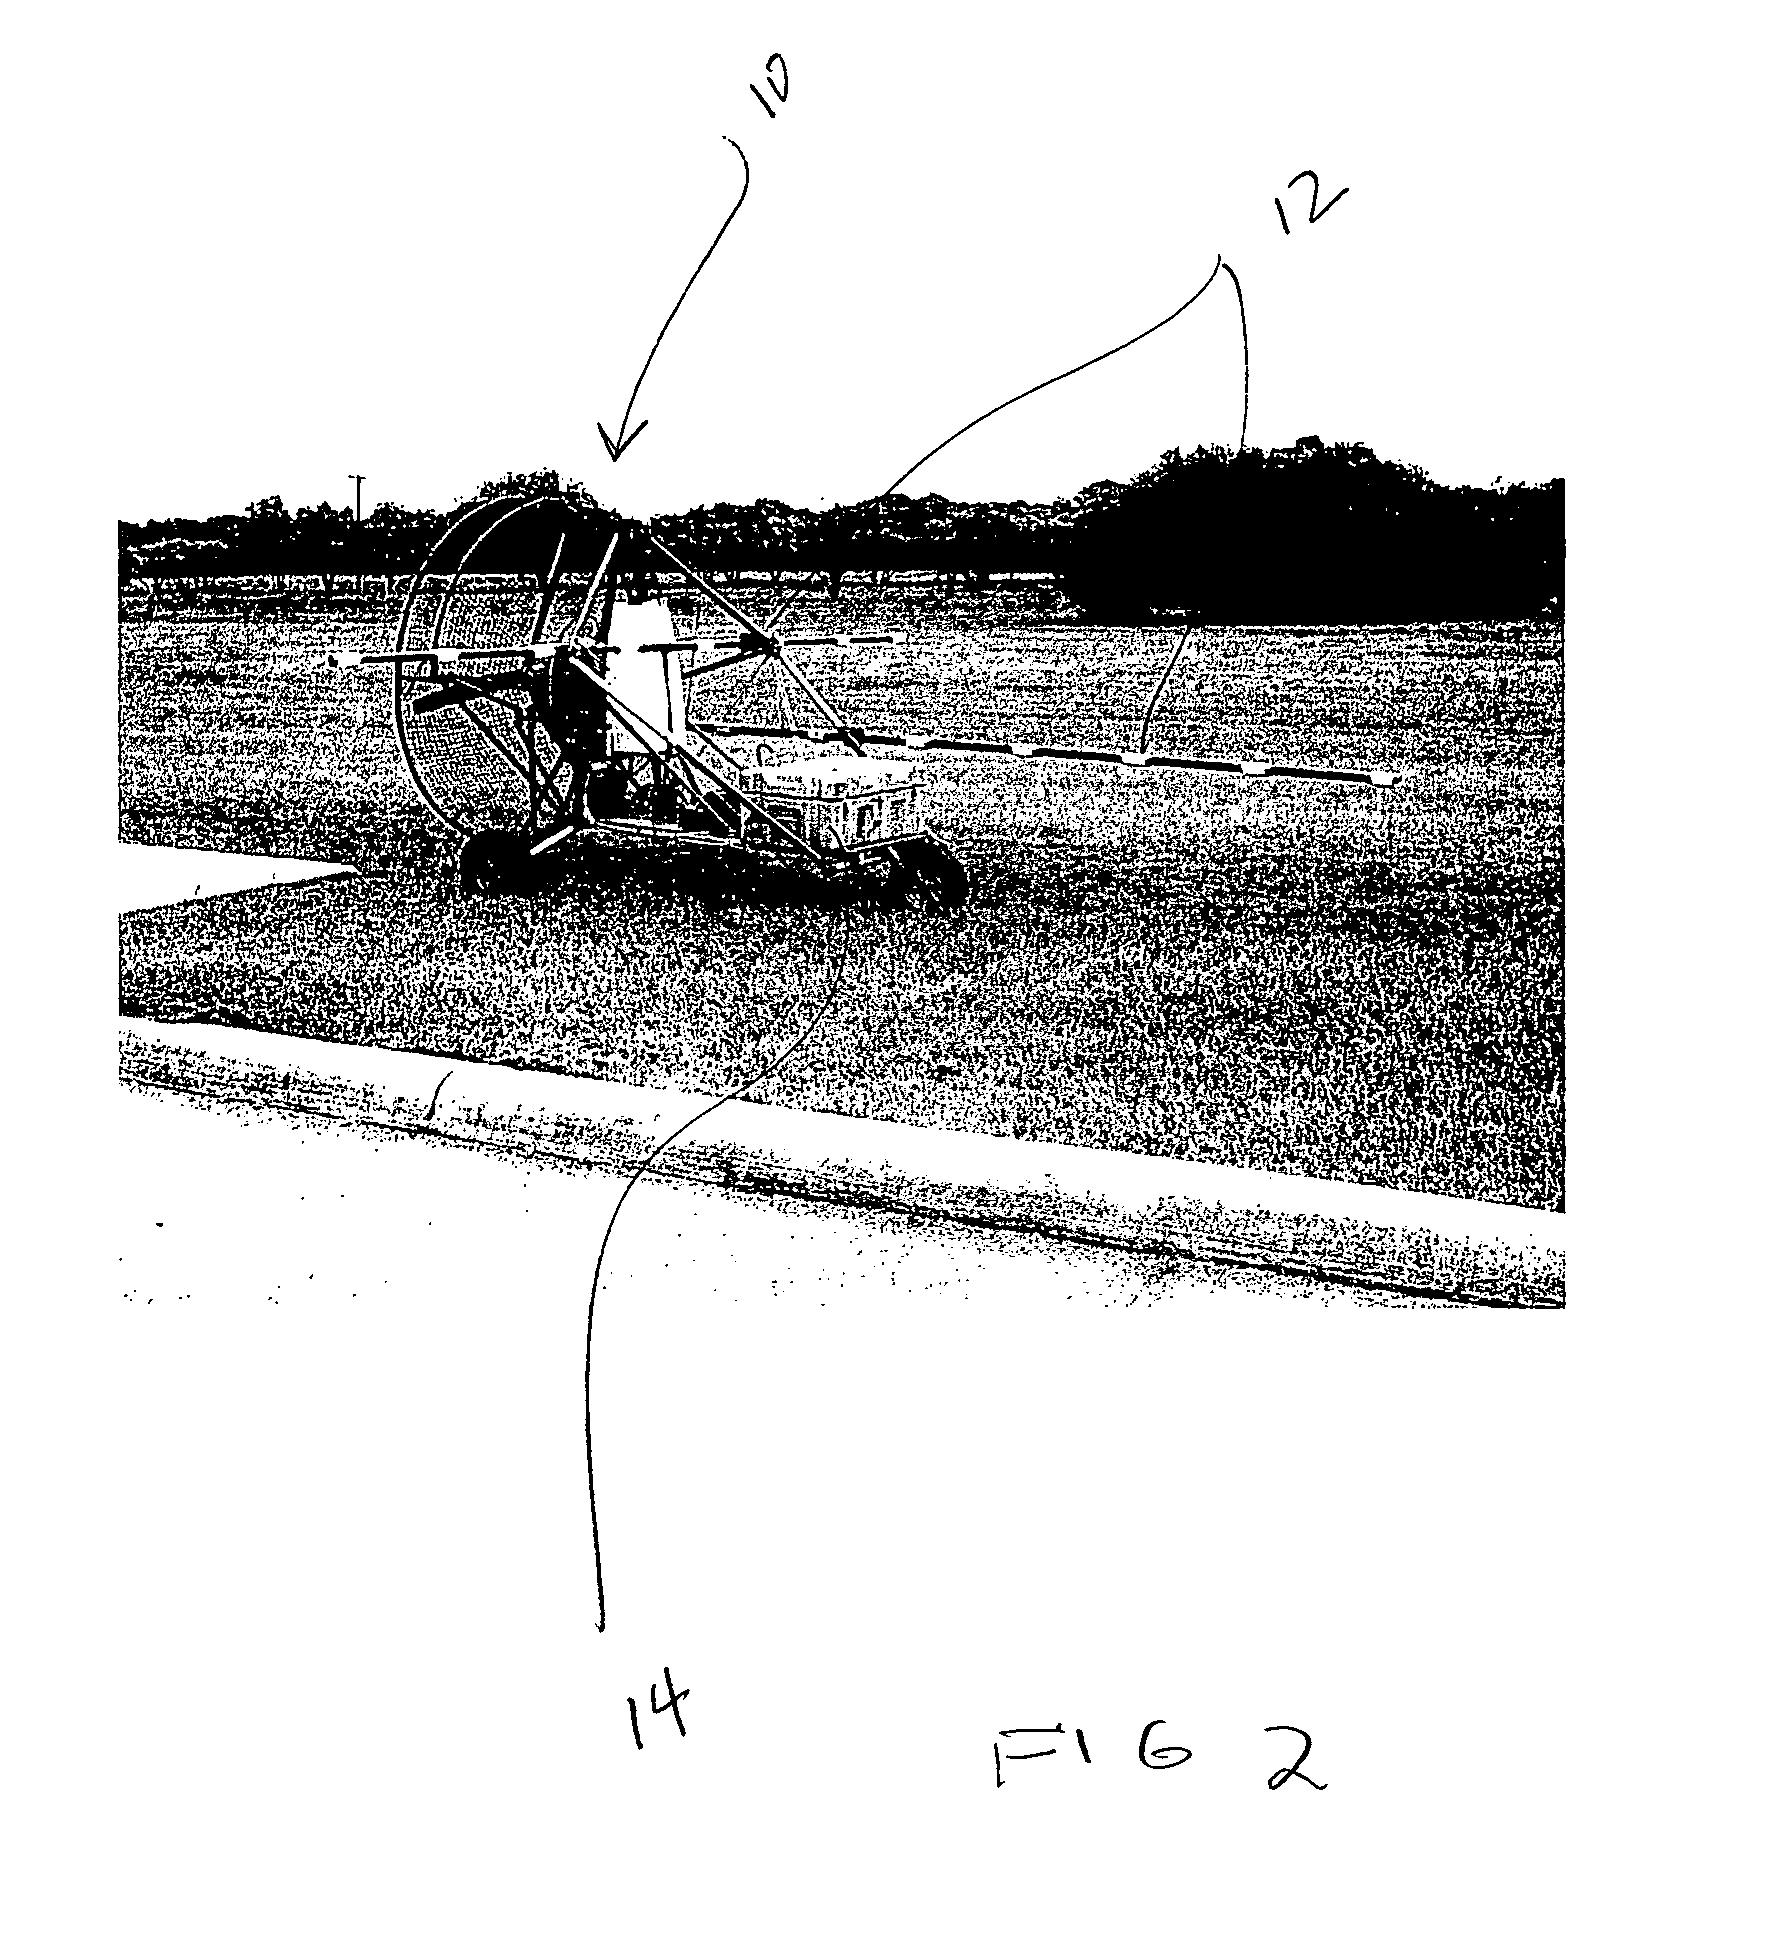 Airborne collection of acoustic data using an unmanned aerial vehicle